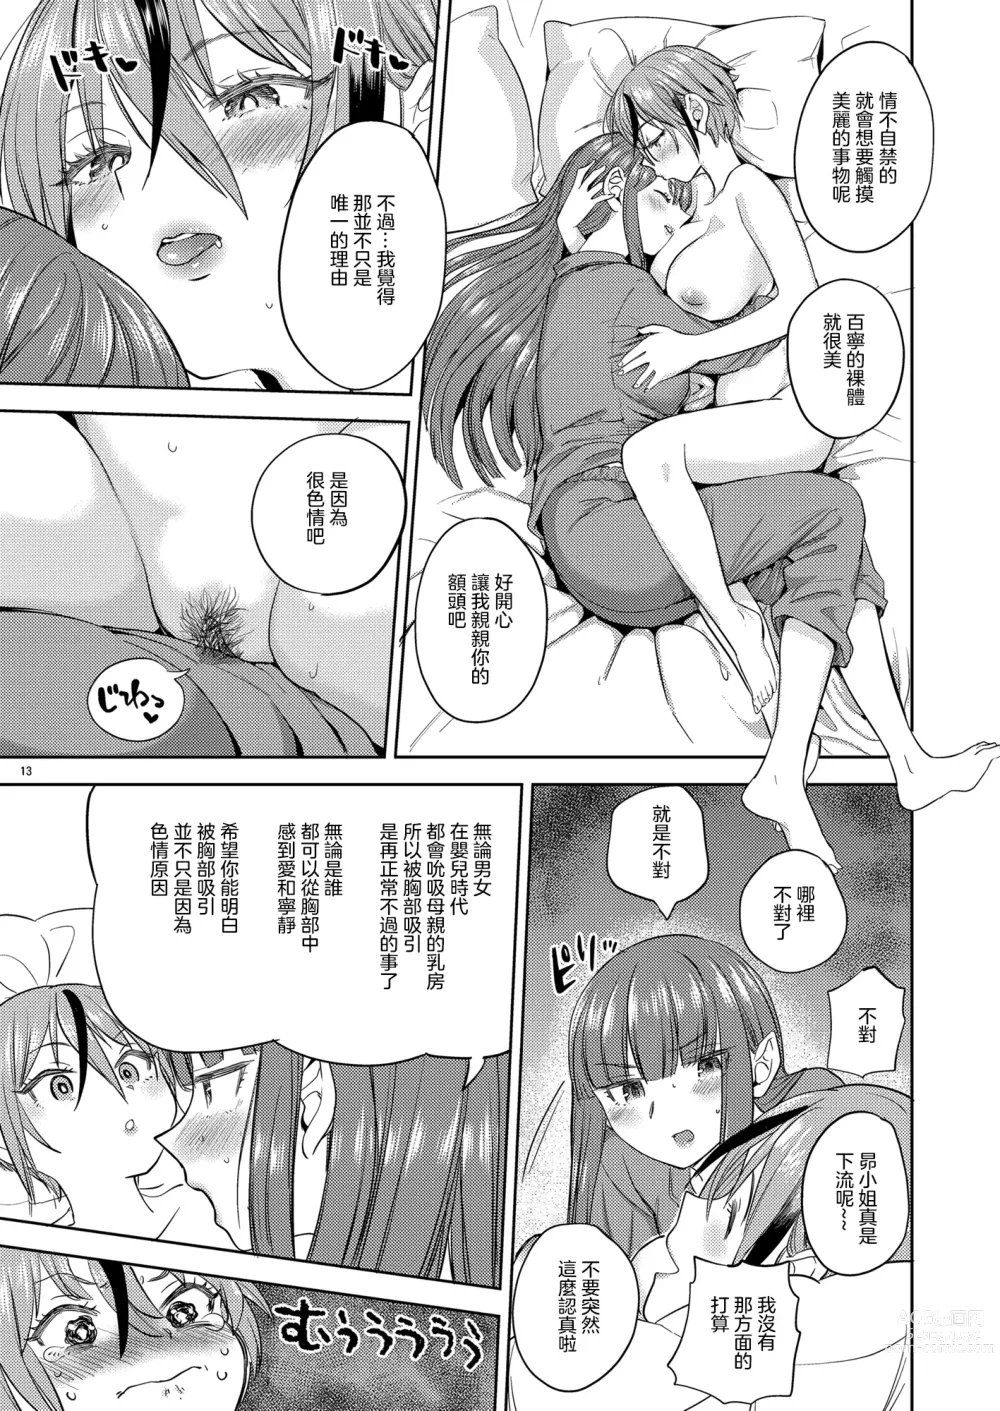 Page 15 of doujinshi 當我們全裸相擁抱之時